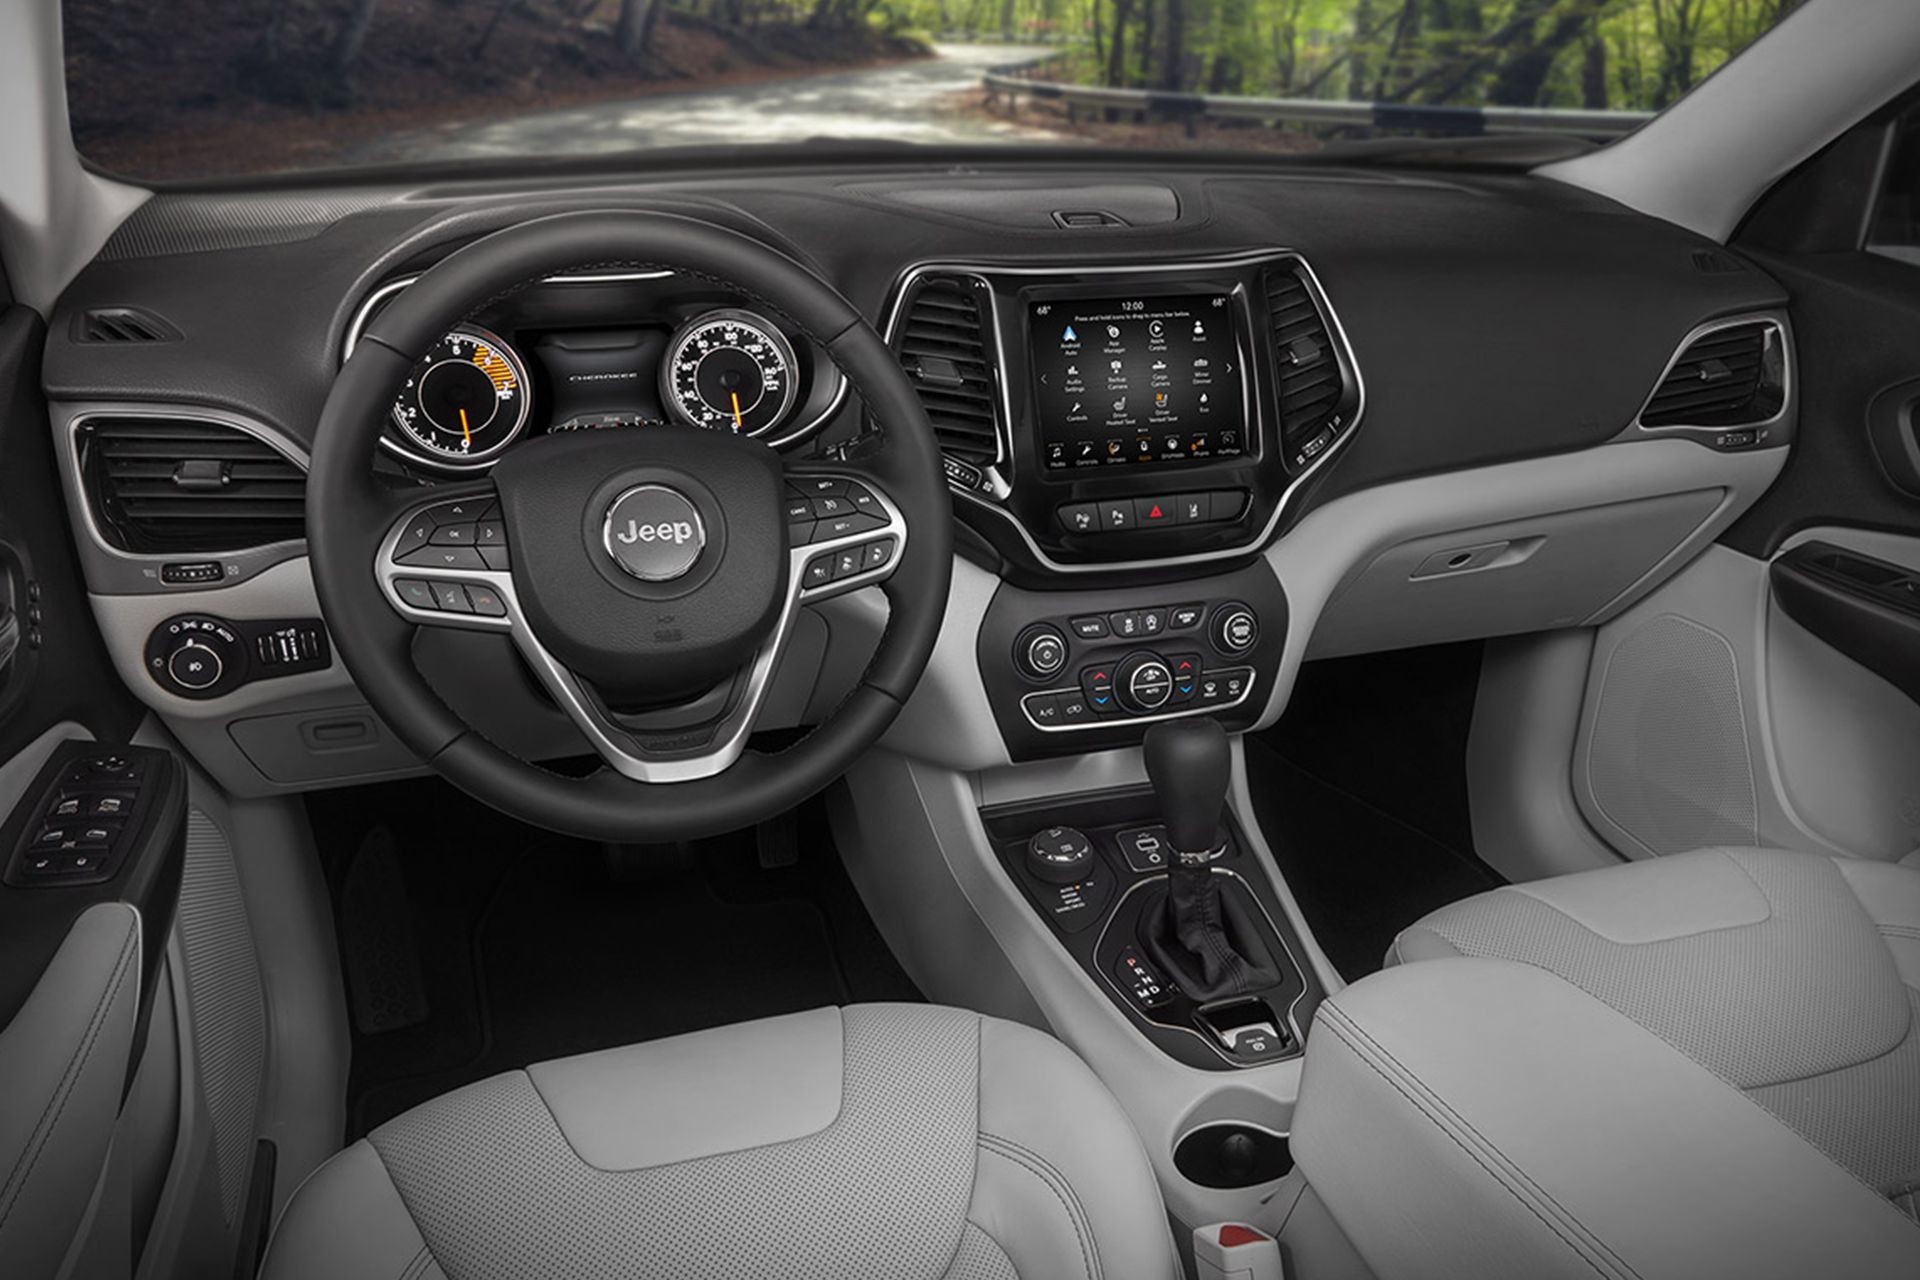 New 2019 Jeep Cherokee Interior Photos And Images